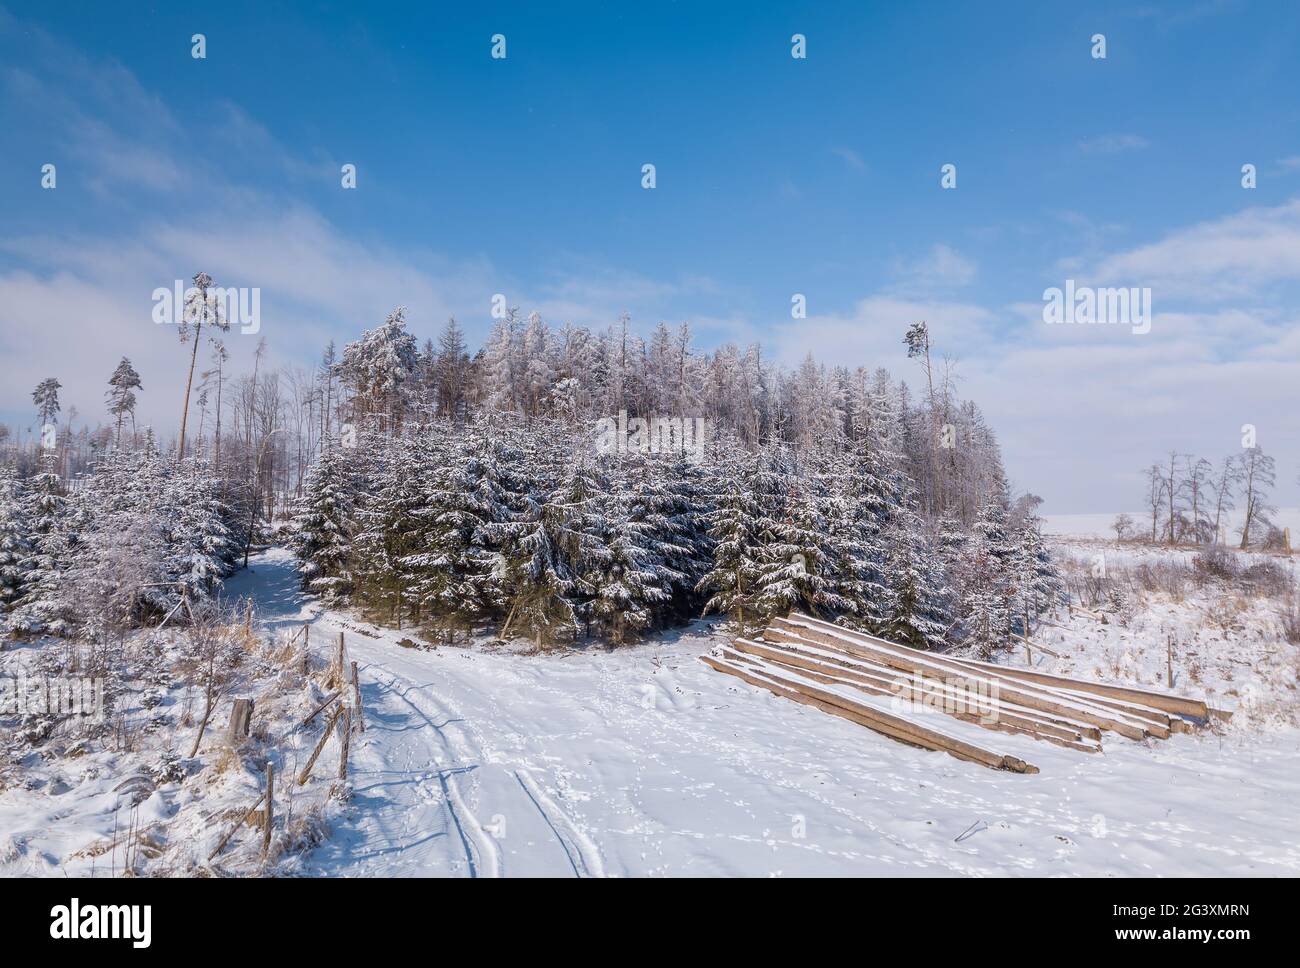 Aerial view of spruce tree in deforested landscape Stock Photo